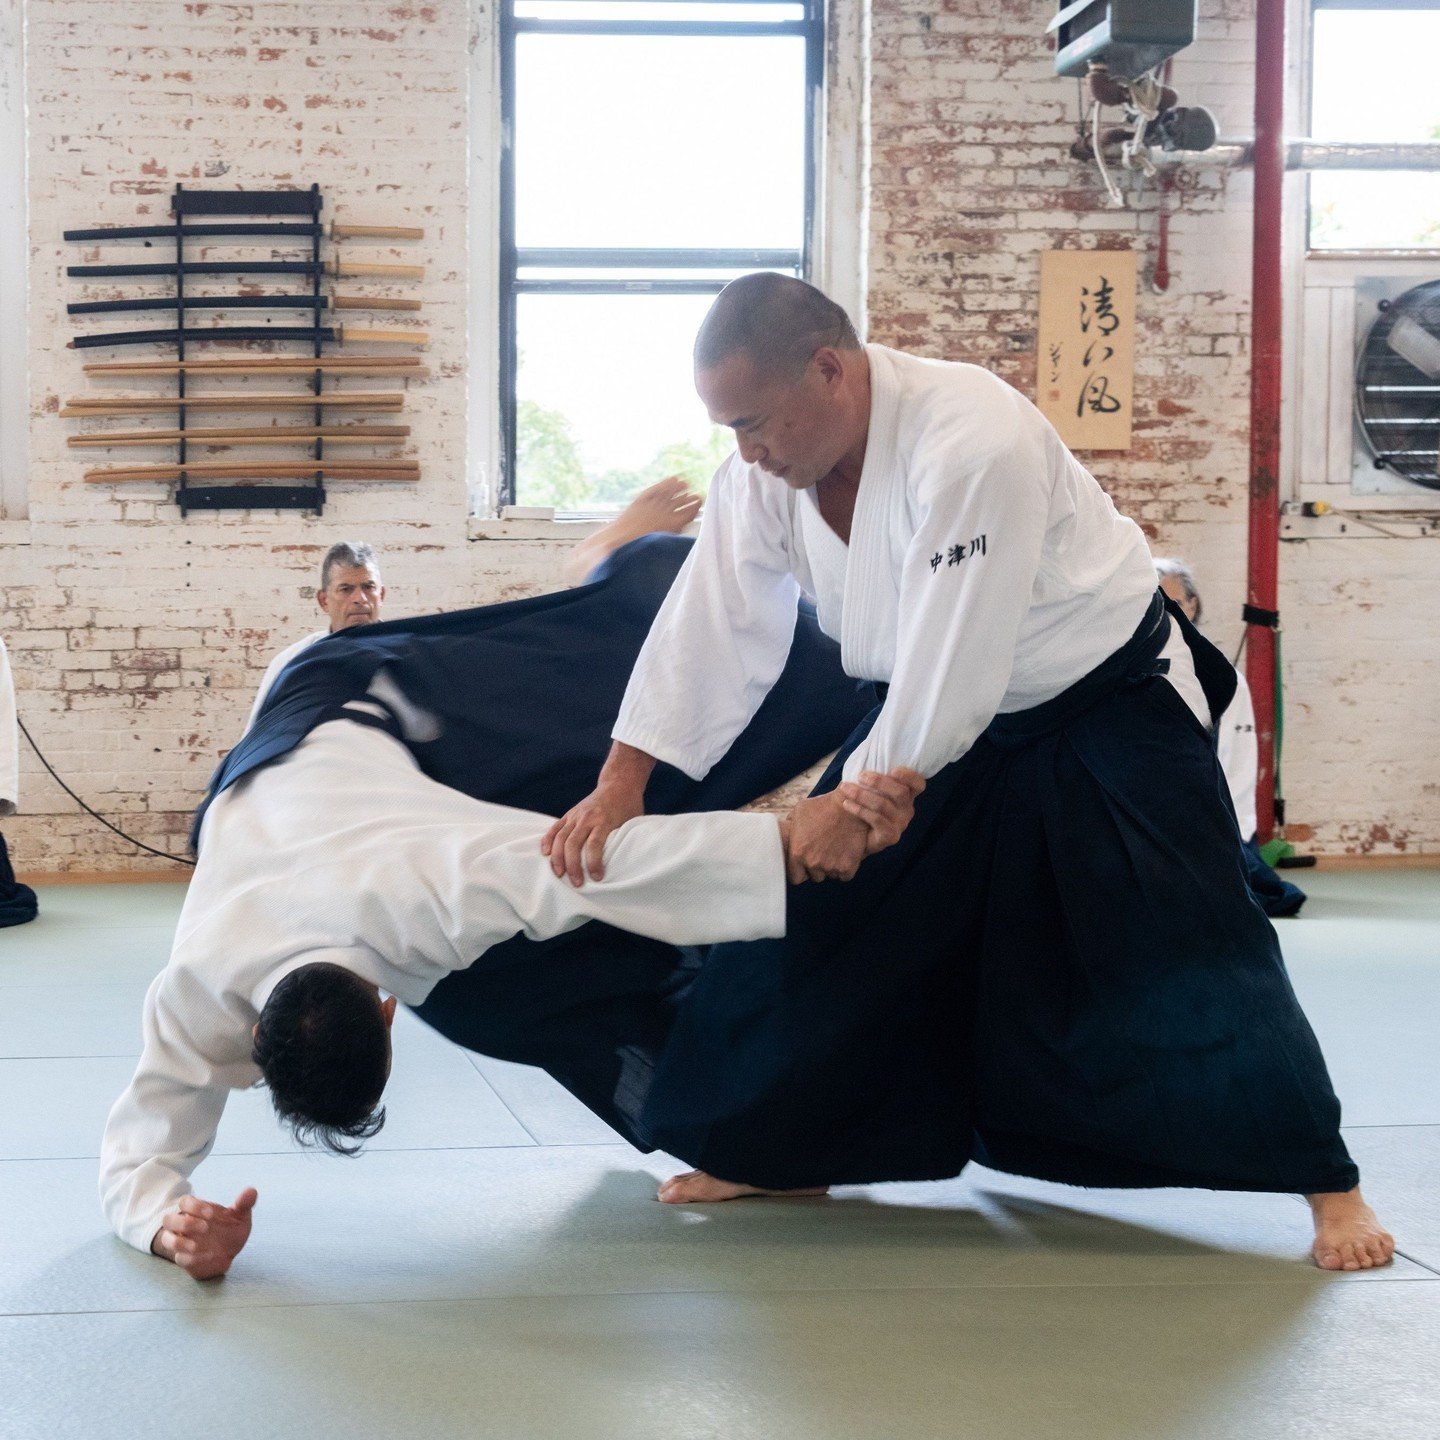 Announcing! Summer seminar at the end of June at Boston Aikikai with Junya Nakatsugawa and Jen Henis from New York Aikikai, as well as JJ Montes (who moved from NY to FL), and Matt May from the Midwest Aikido Center. And a special guest! Stay tuned! 